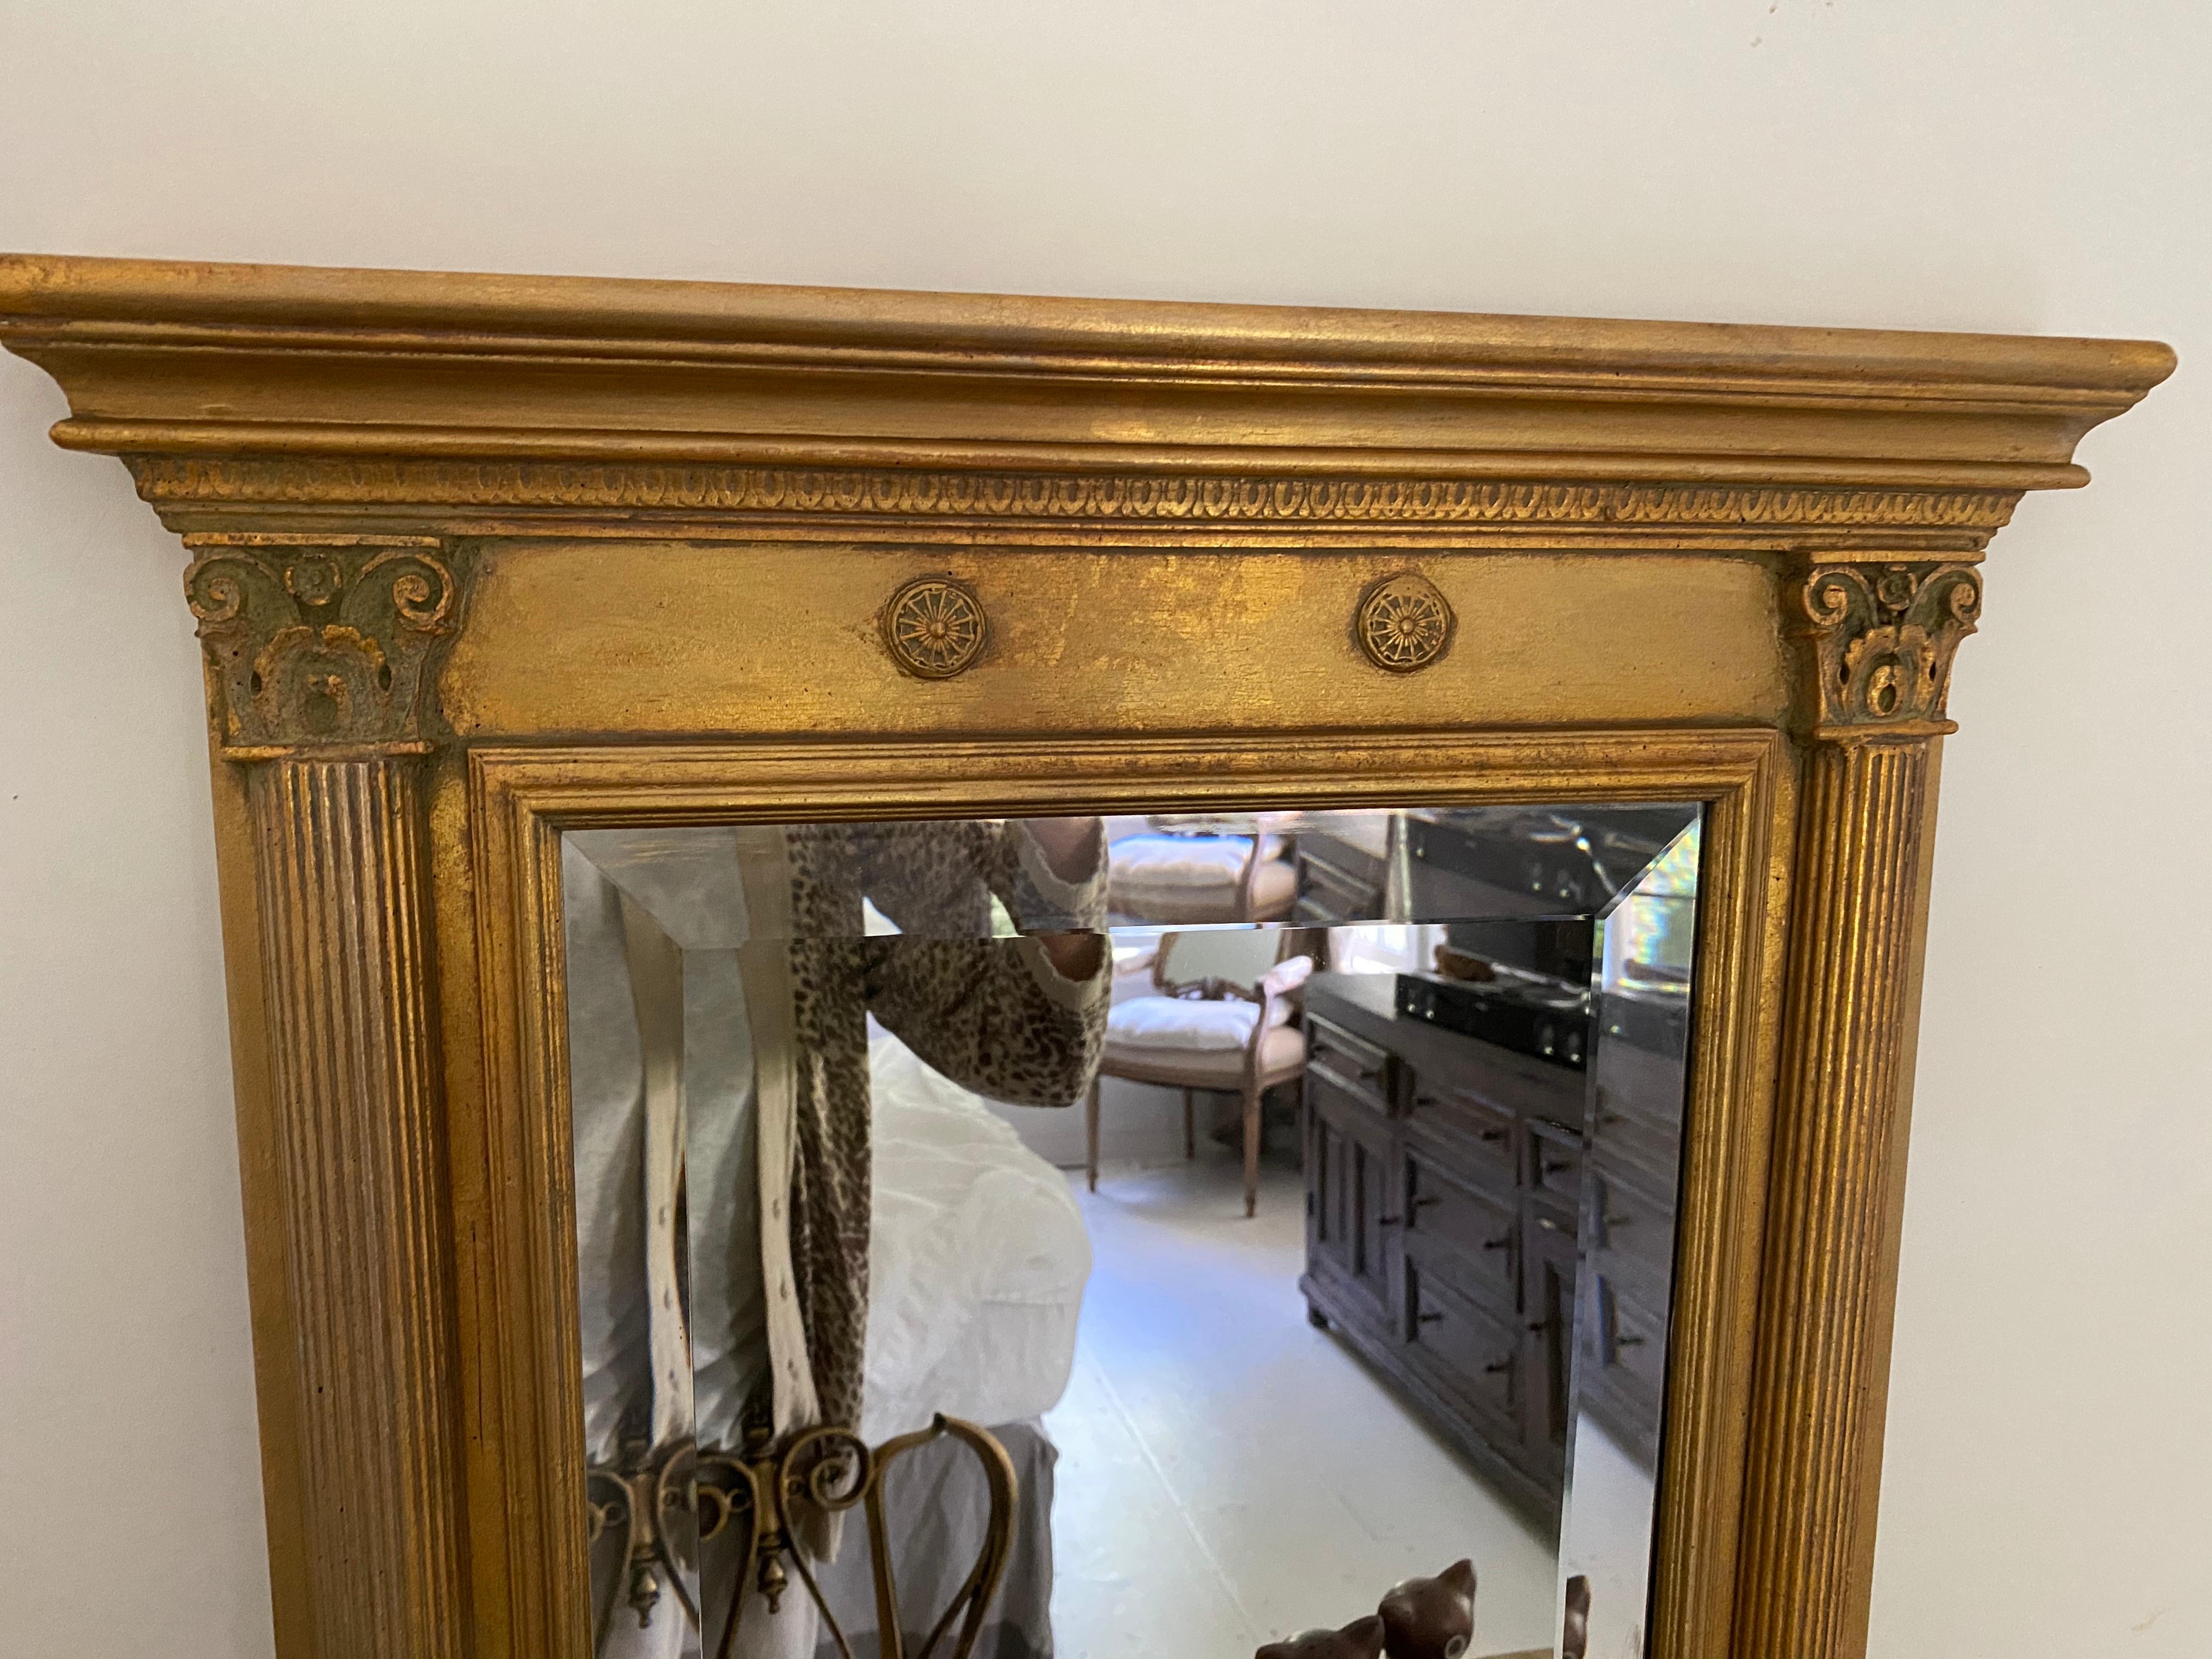 Neoclassical Revival Style Gold Gilt Frame Mirror For Sale 1